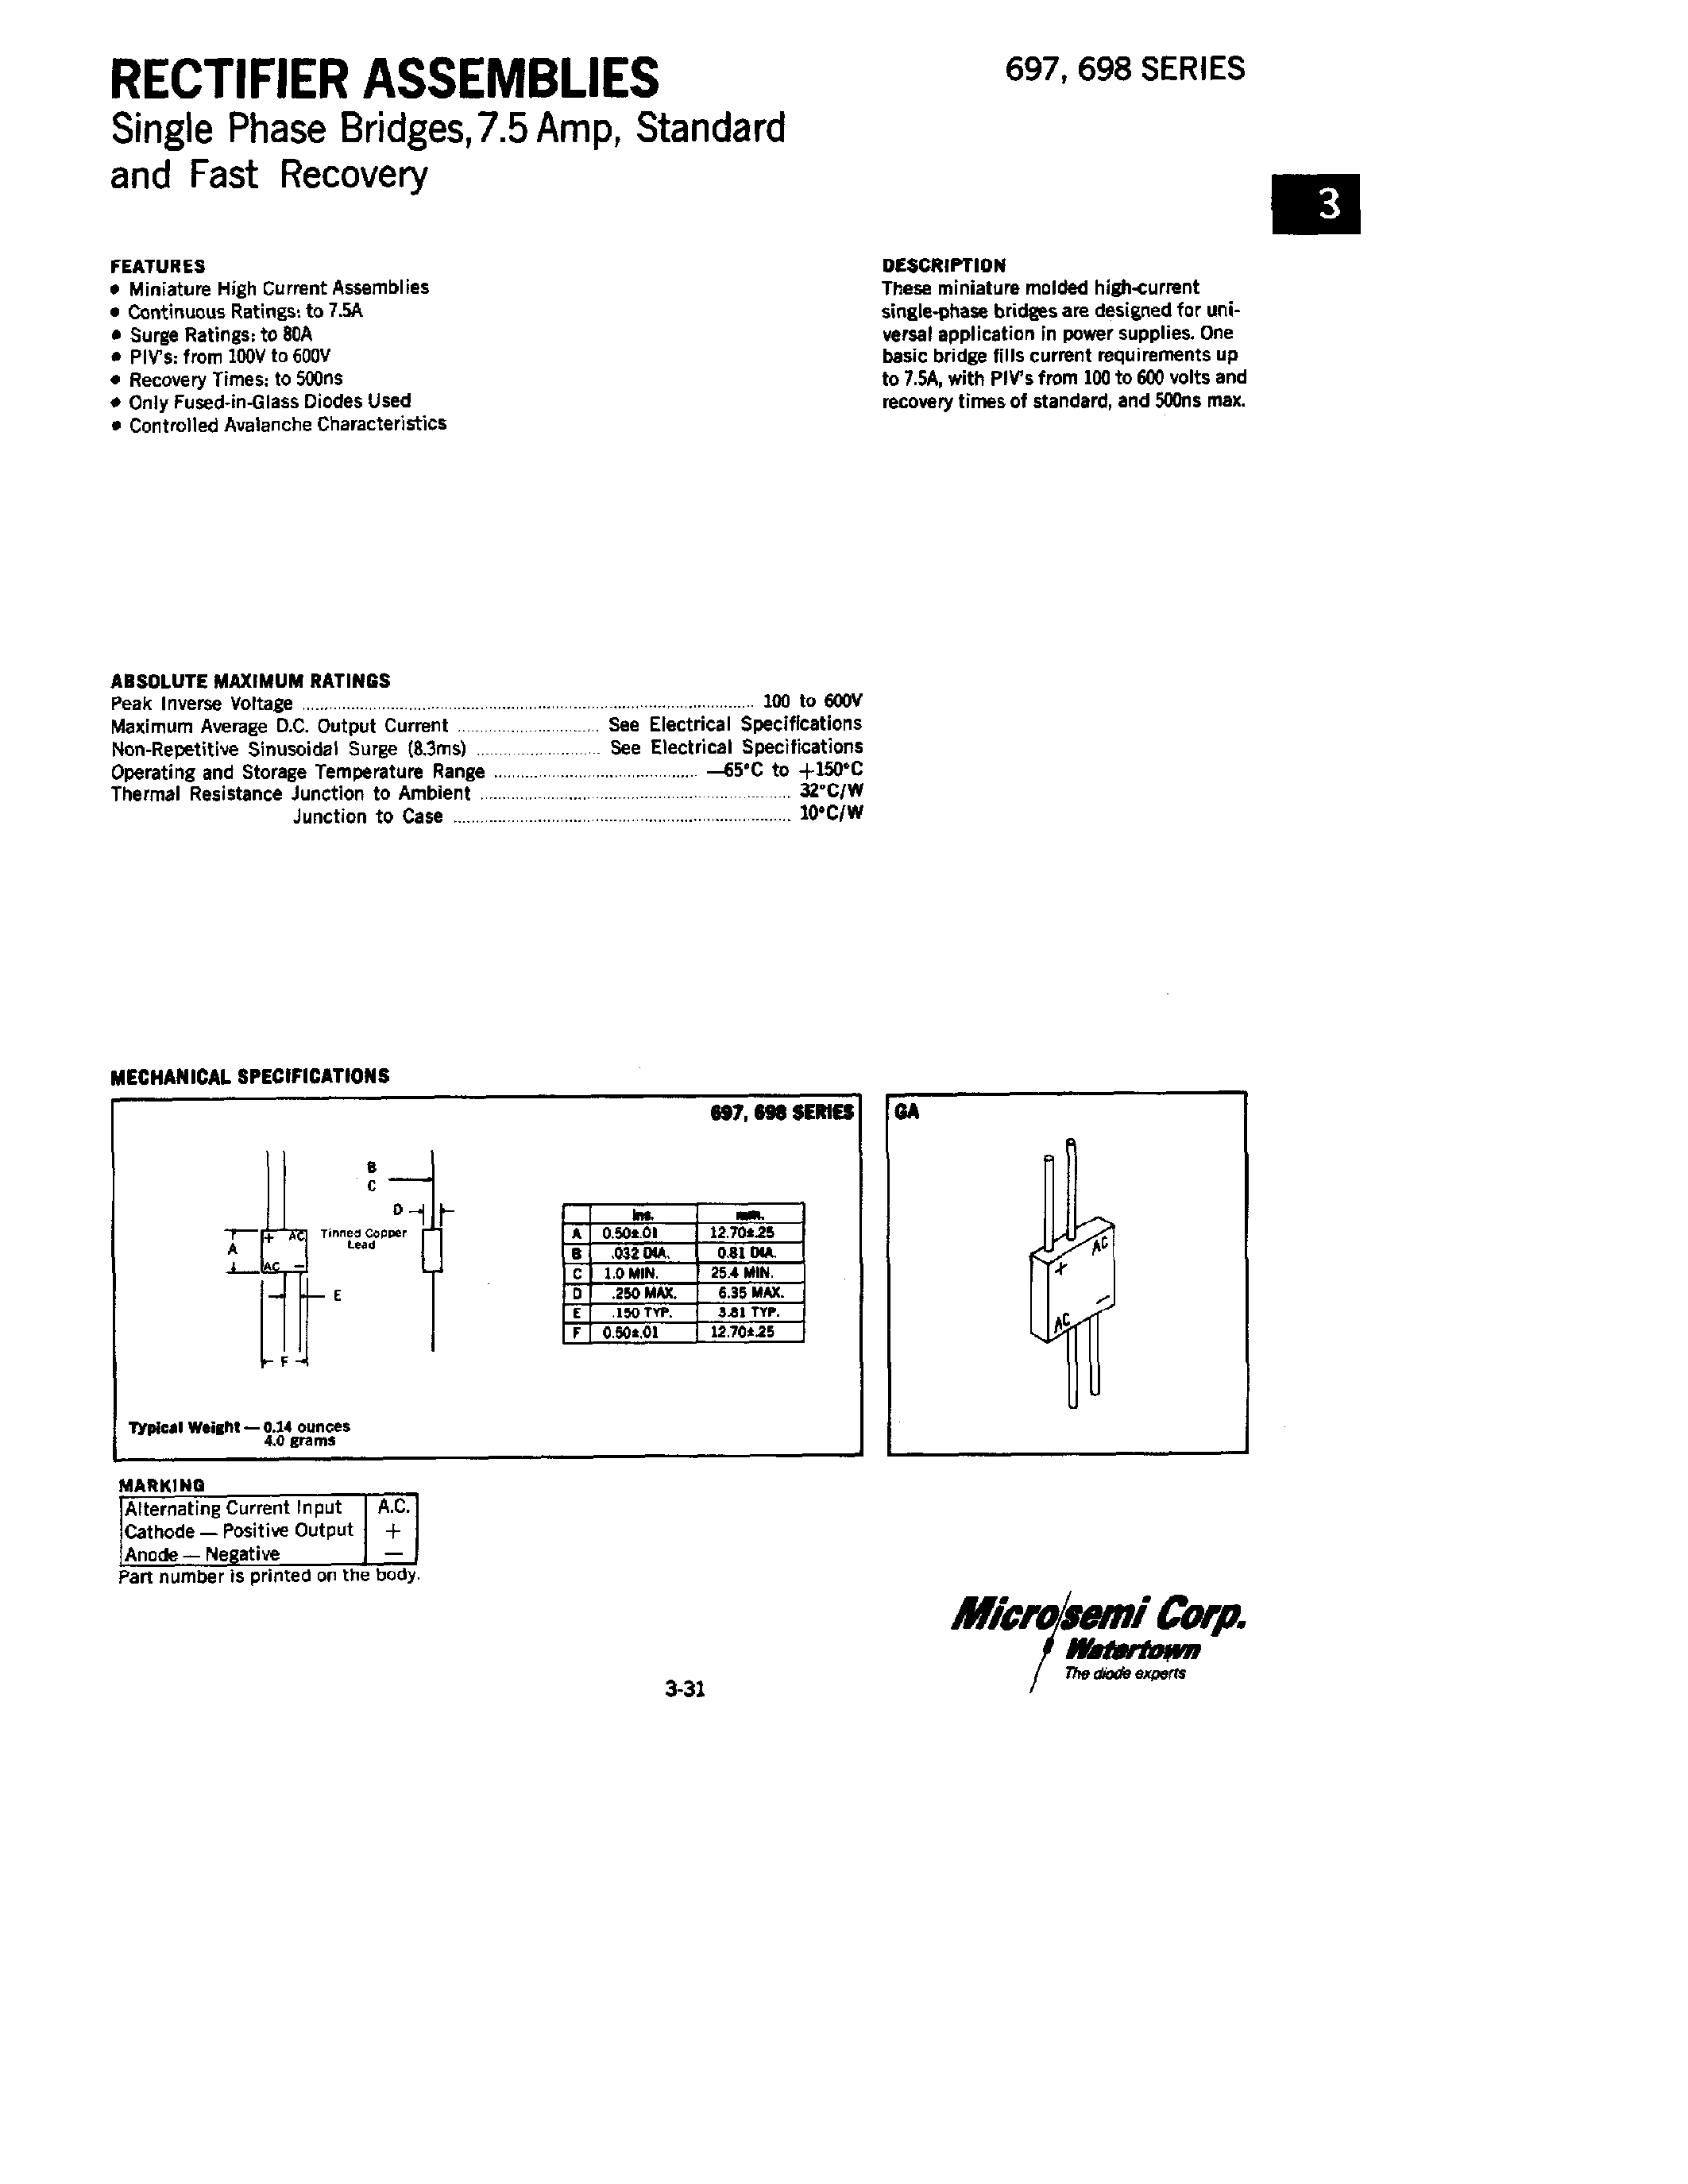 Datasheet 697-5 - RECTIFIERS ASSEMBLIES SINGLE PHASE BRIDGES/ 7.5 AMP/ STANDARD AND FAST RECOVERY page 1